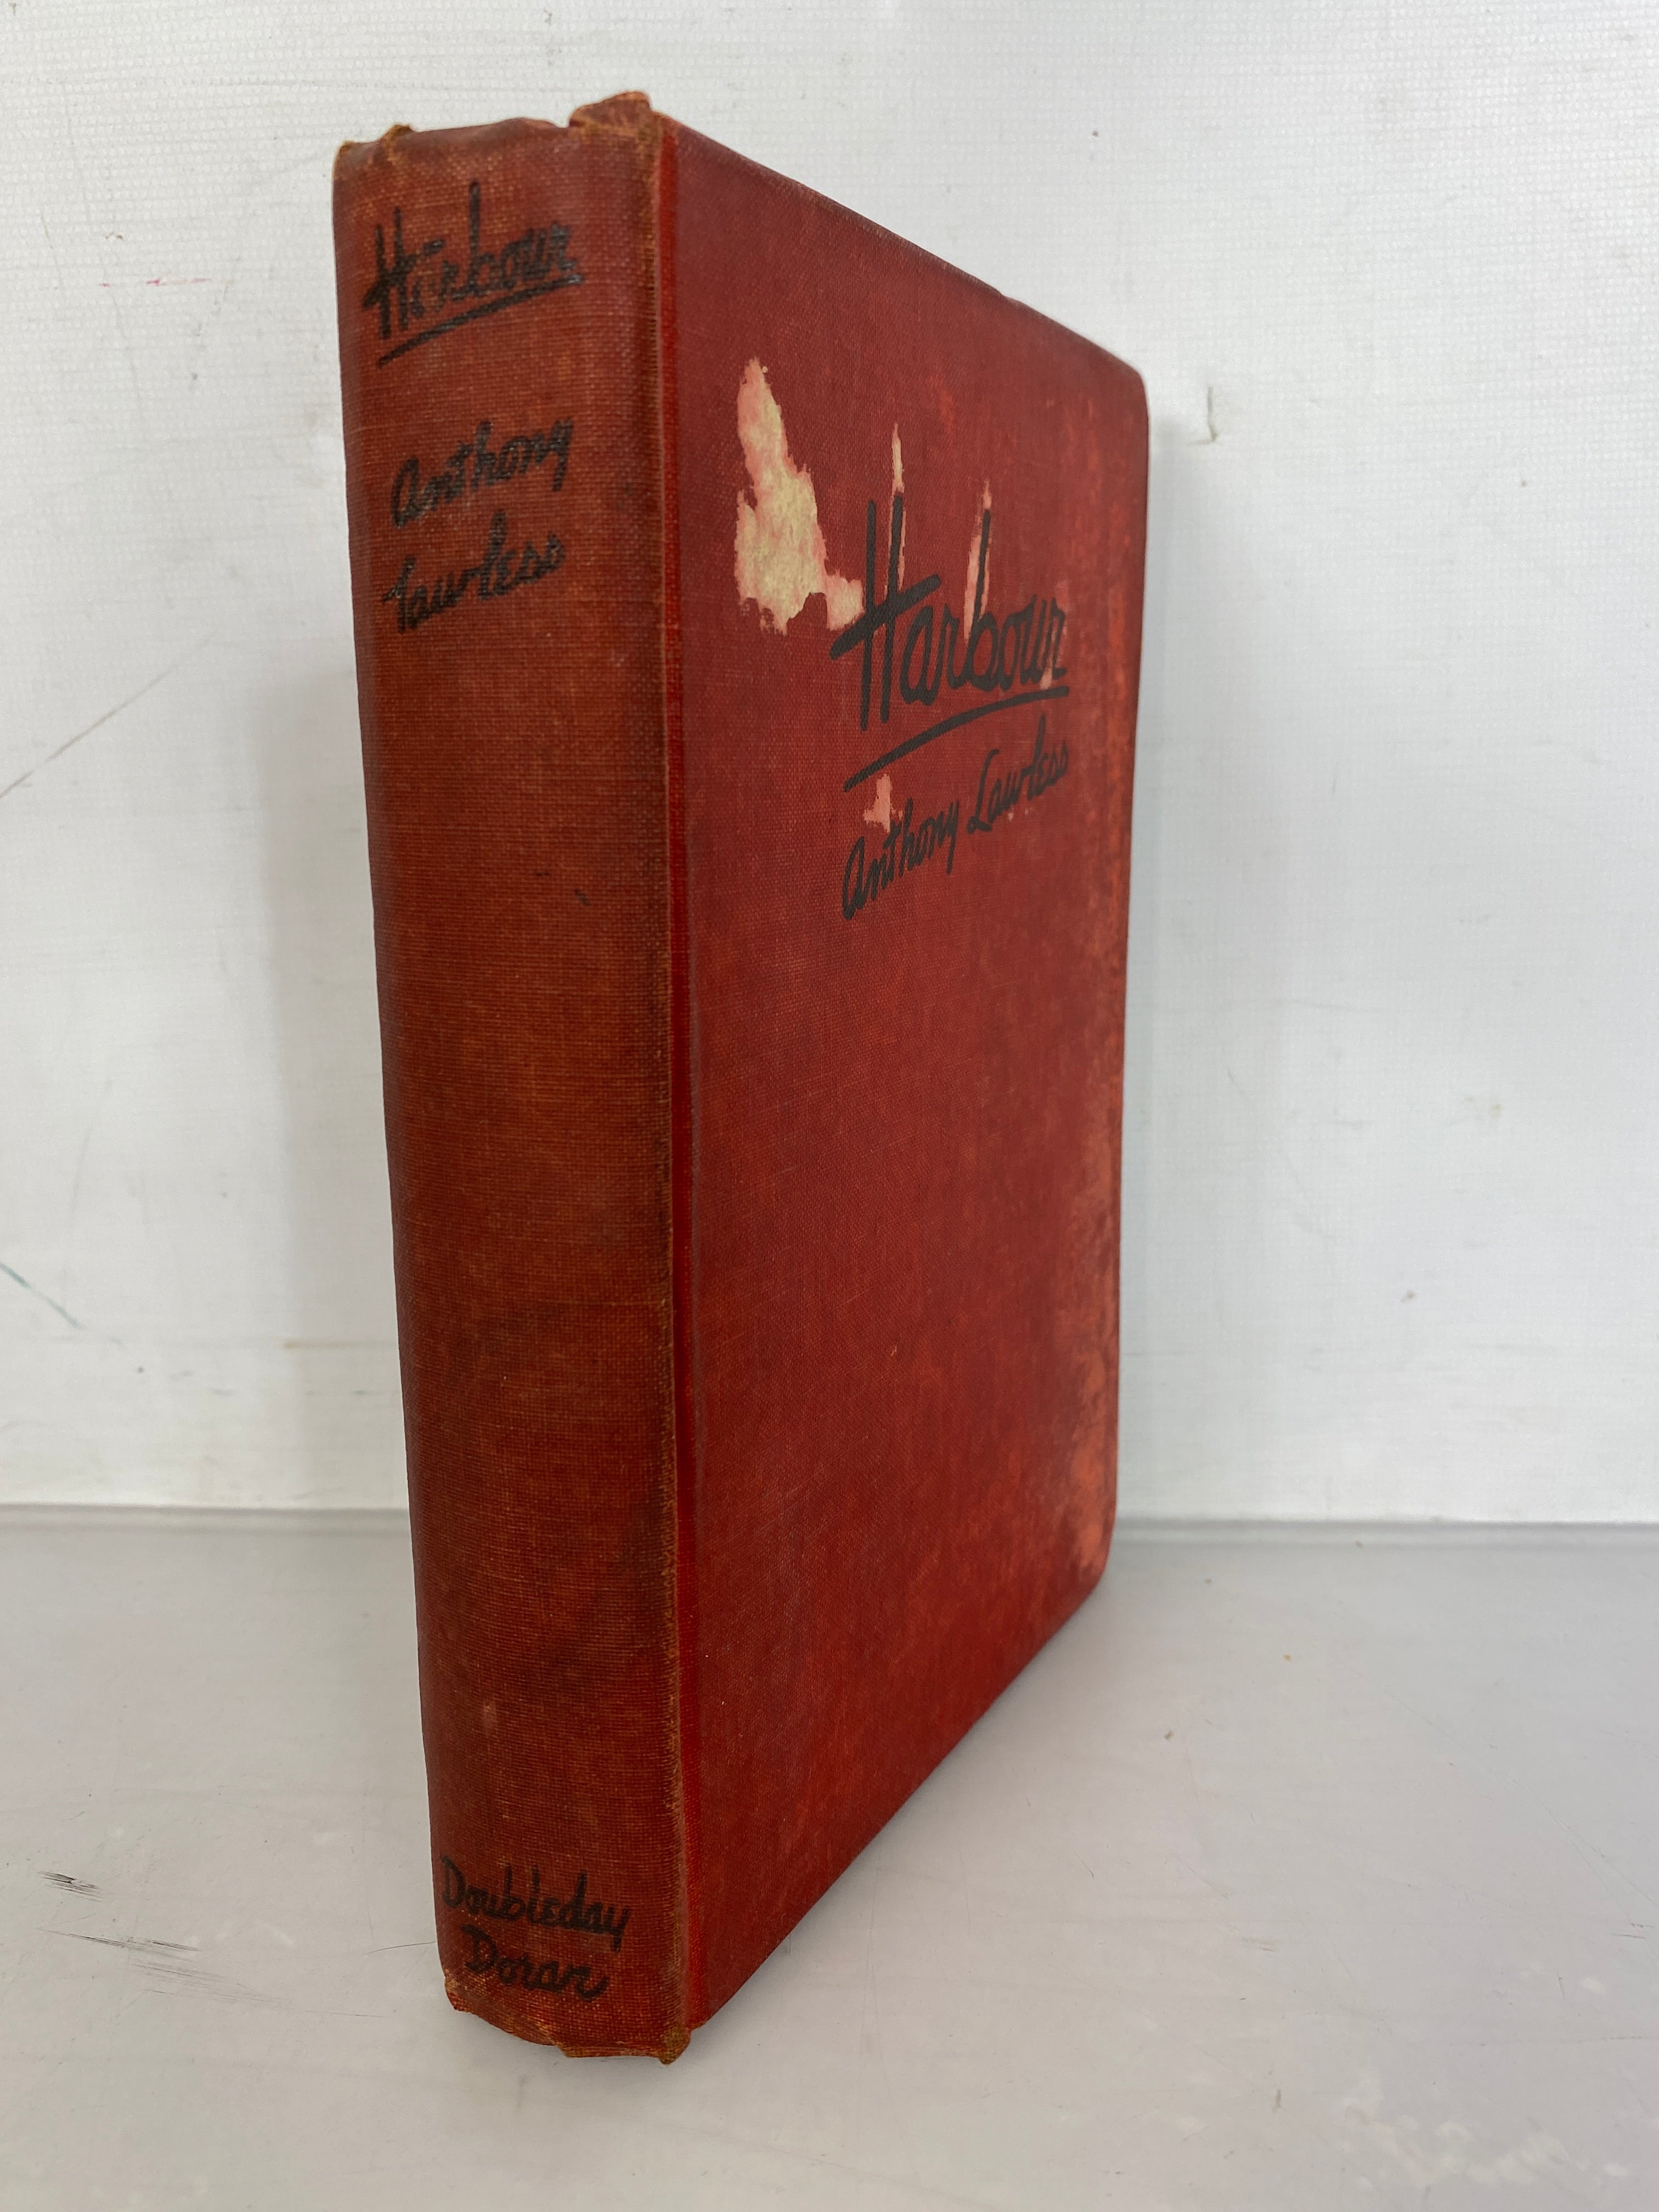 Harbour by Anthony Lawless First Edition 1932 HC